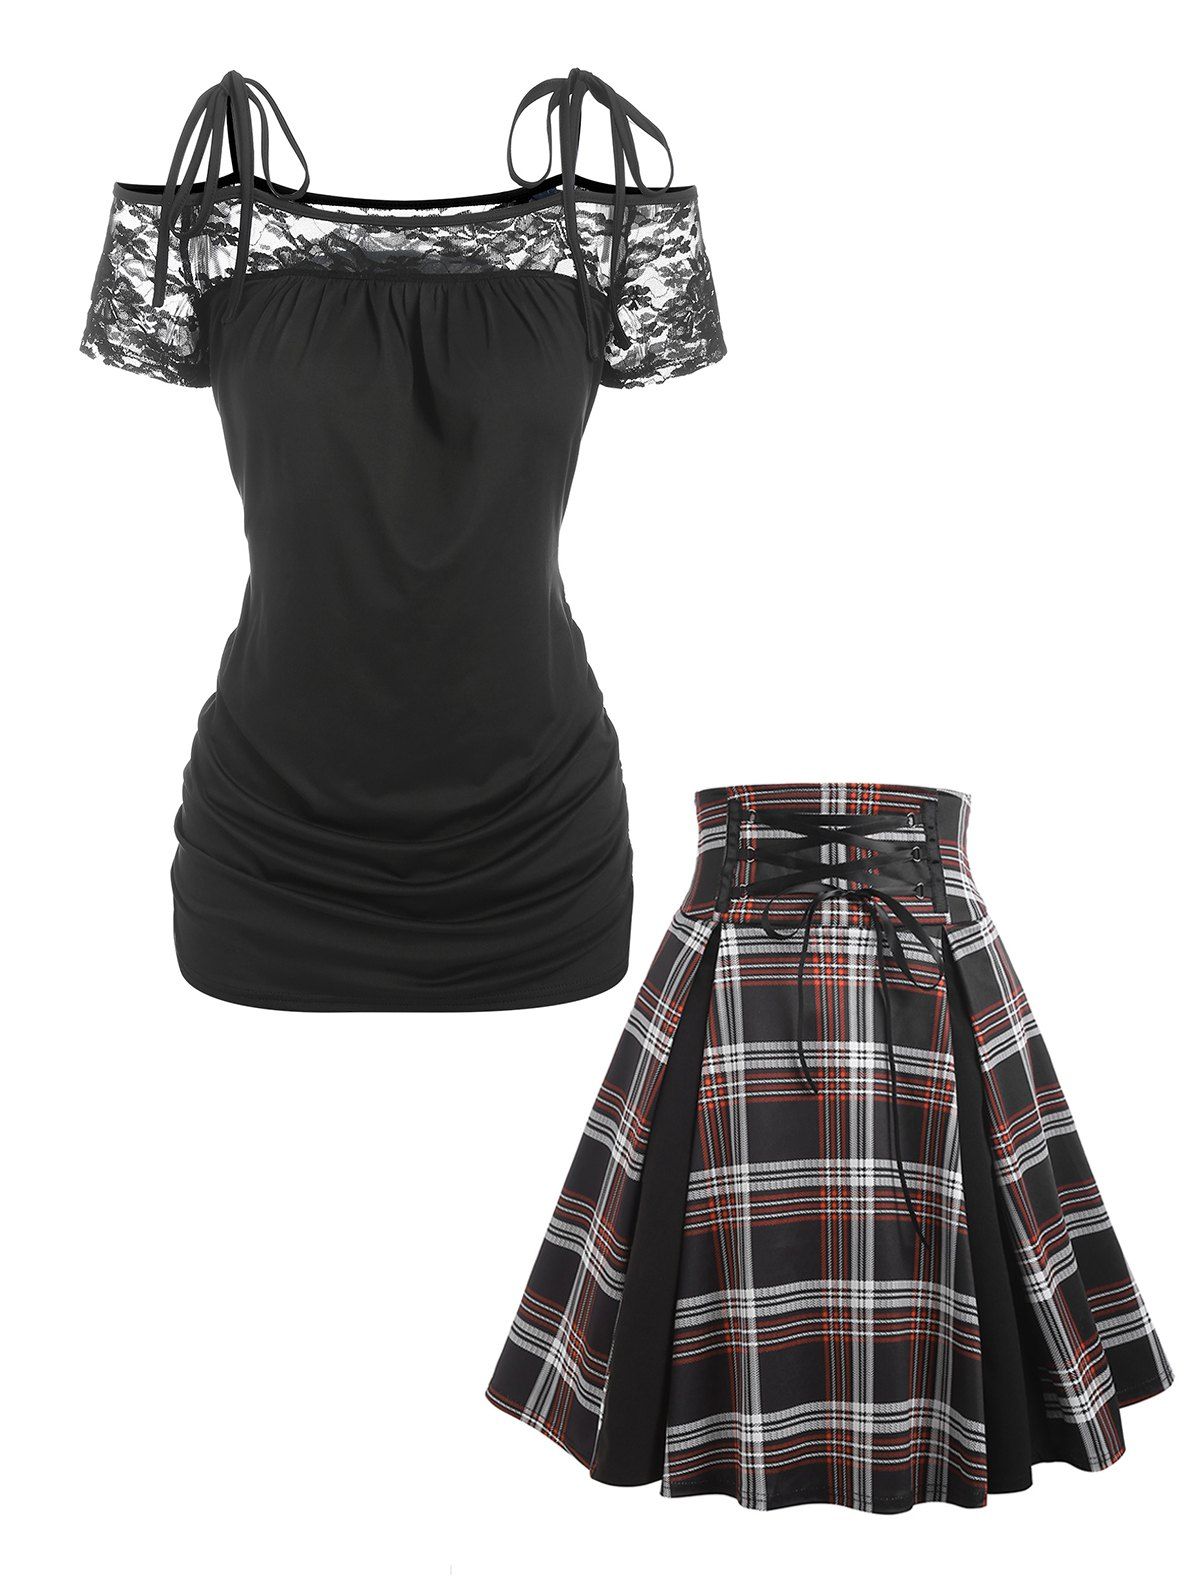 Lace Panel Tie Shoulder T-shirt and Plaid Skirt Outfit - BLACK S